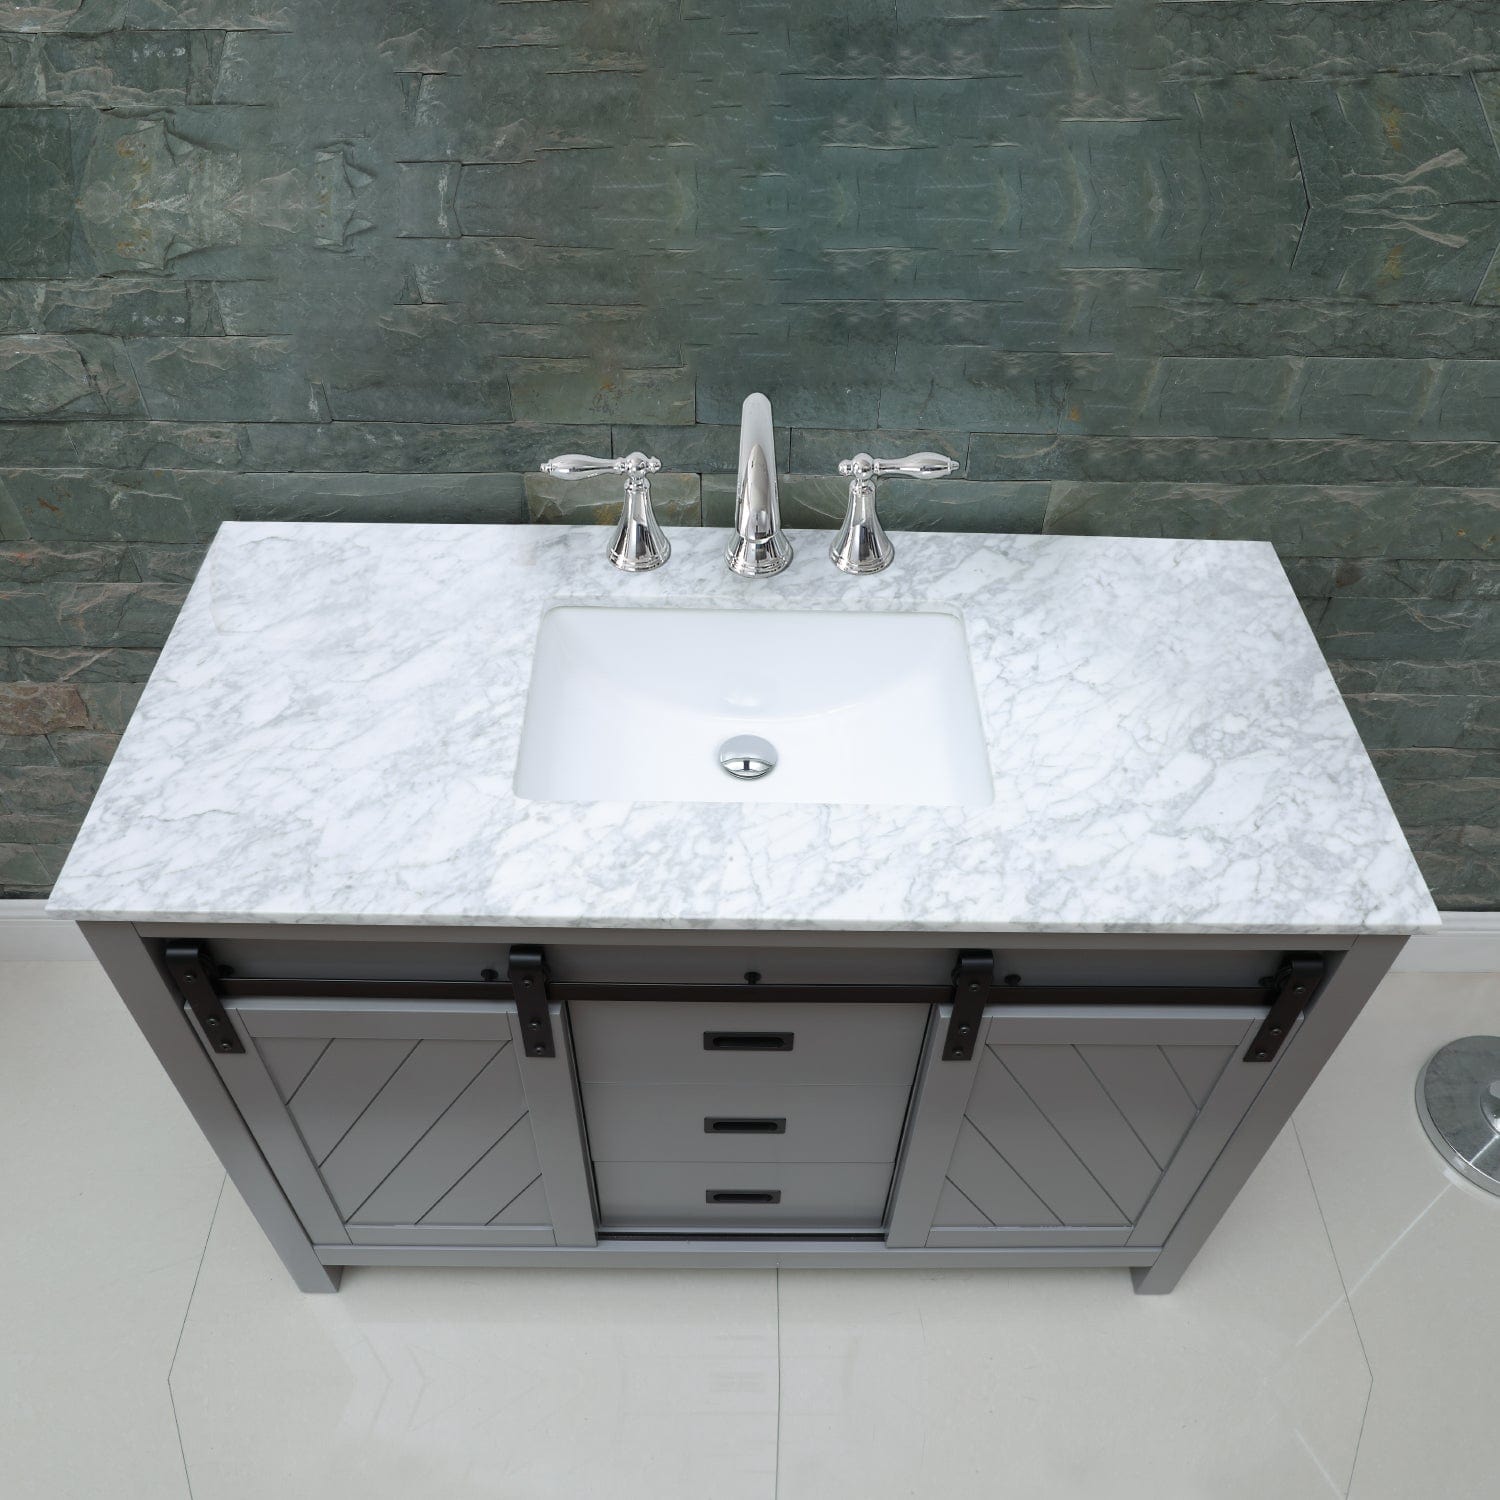 Altair Kinsley 48" Single Bathroom Vanity Set in Gray and Carrara White Marble Countertop without Mirror 536048-GR-CA-NM - Molaix631112970488Vanity536048-GR-CA-NM